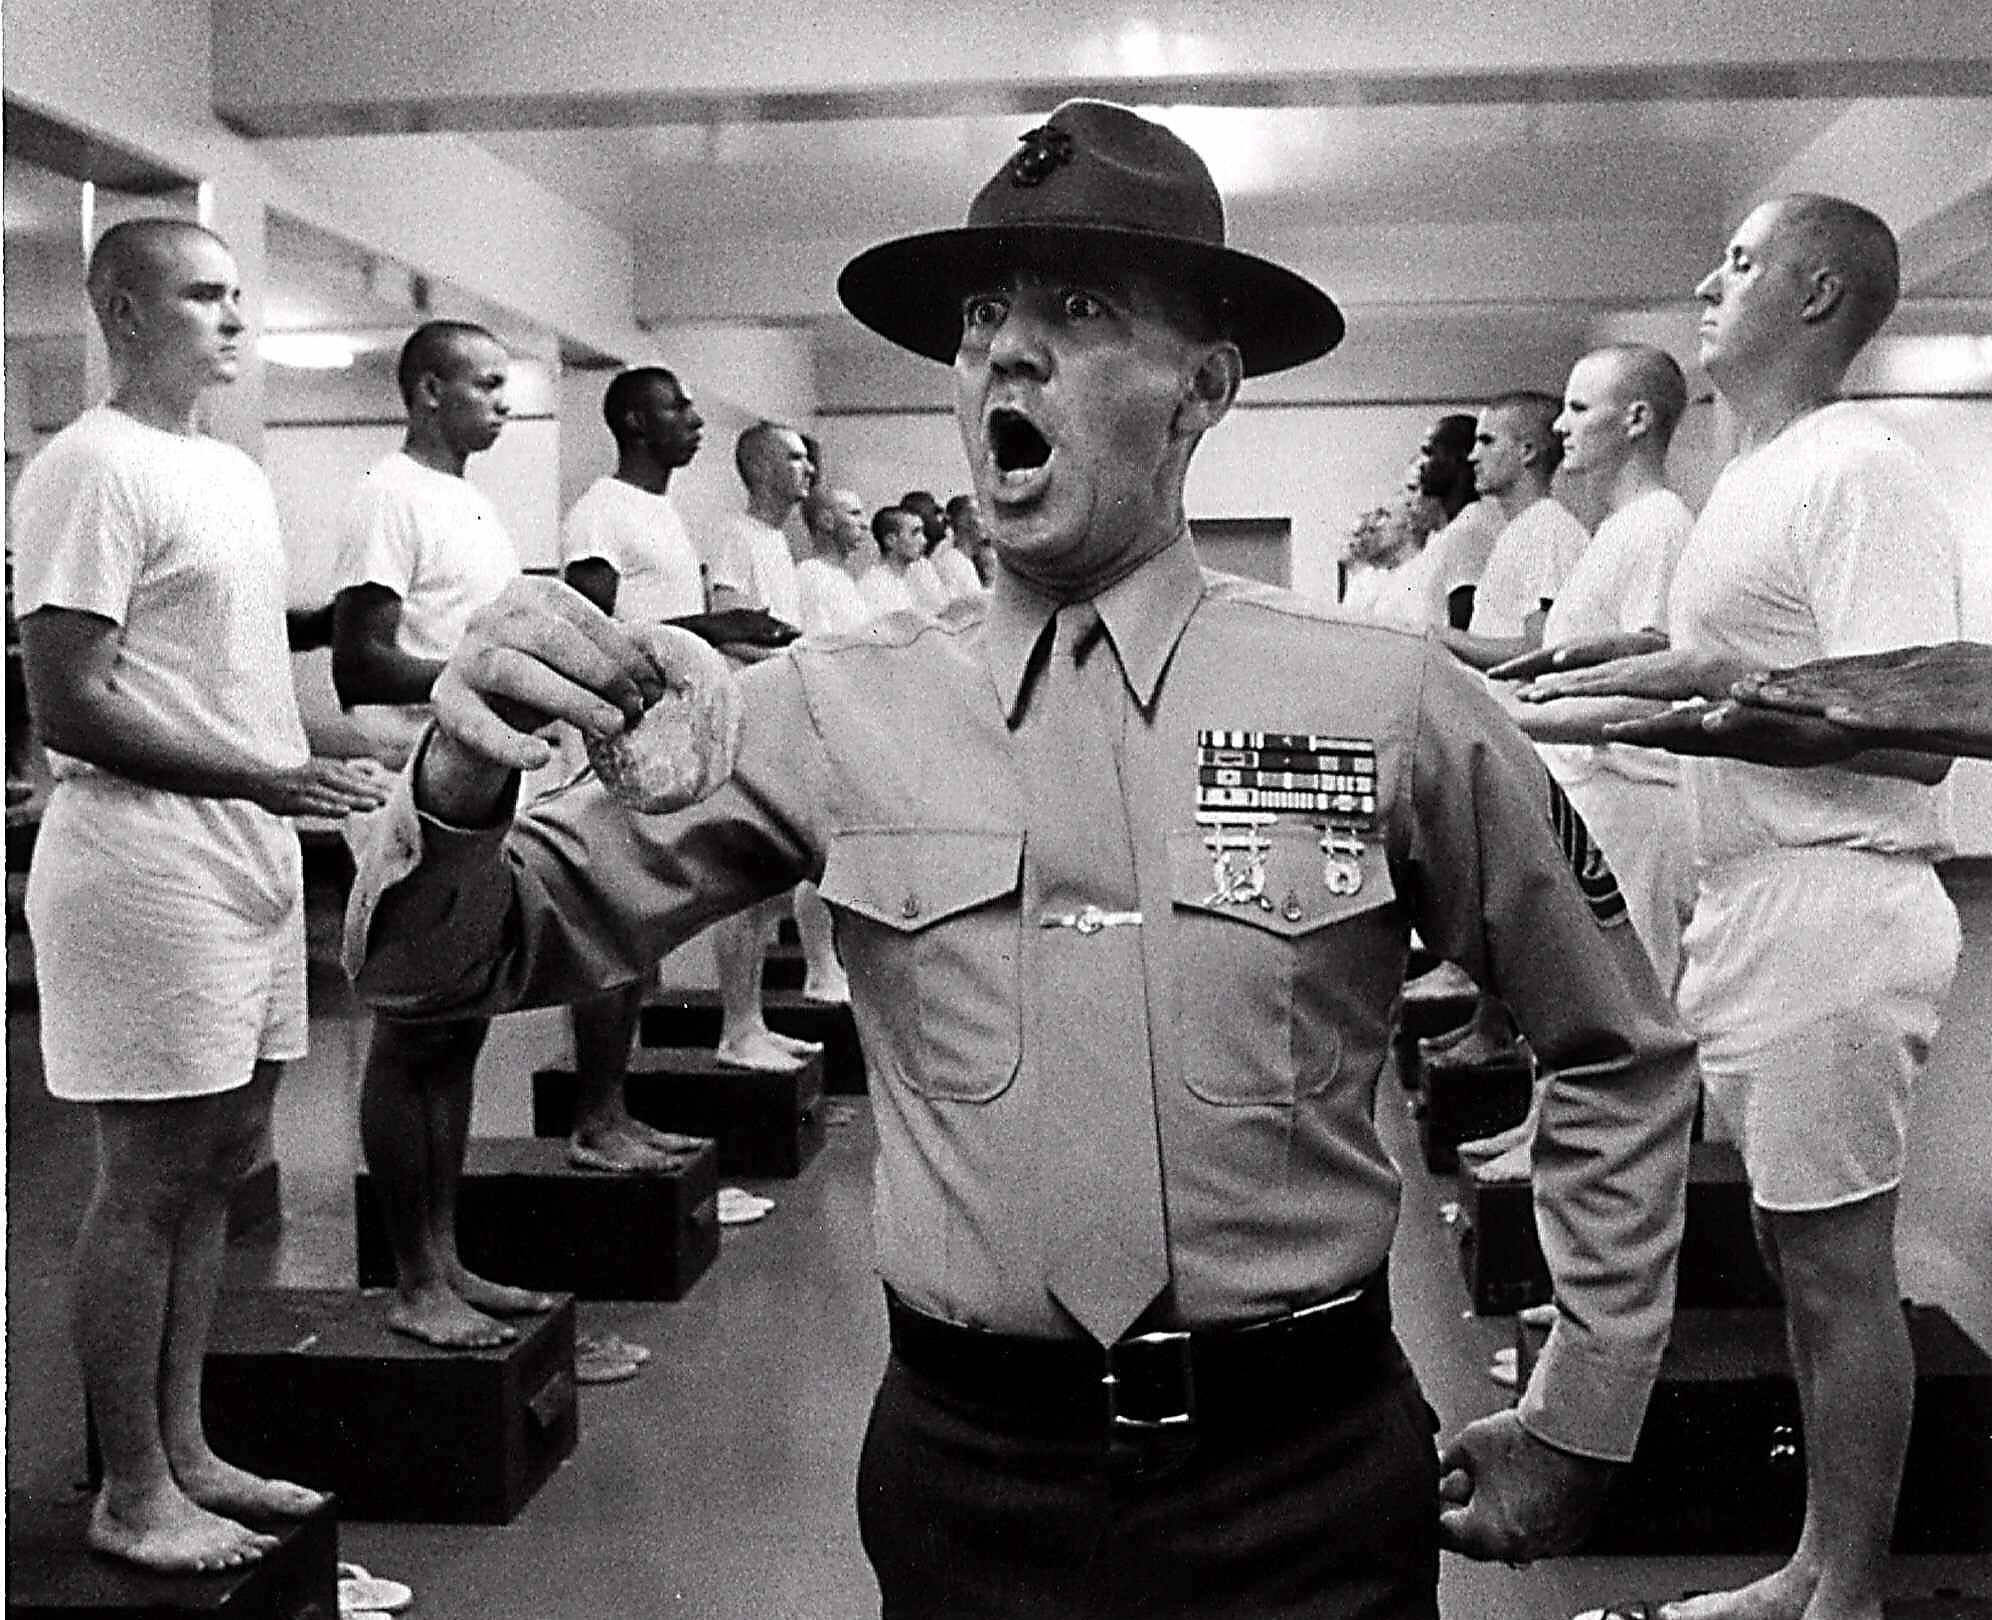 R. Lee Ermey, who created indelible 'Full Metal Jacket' drill sergeant,  dies at 74